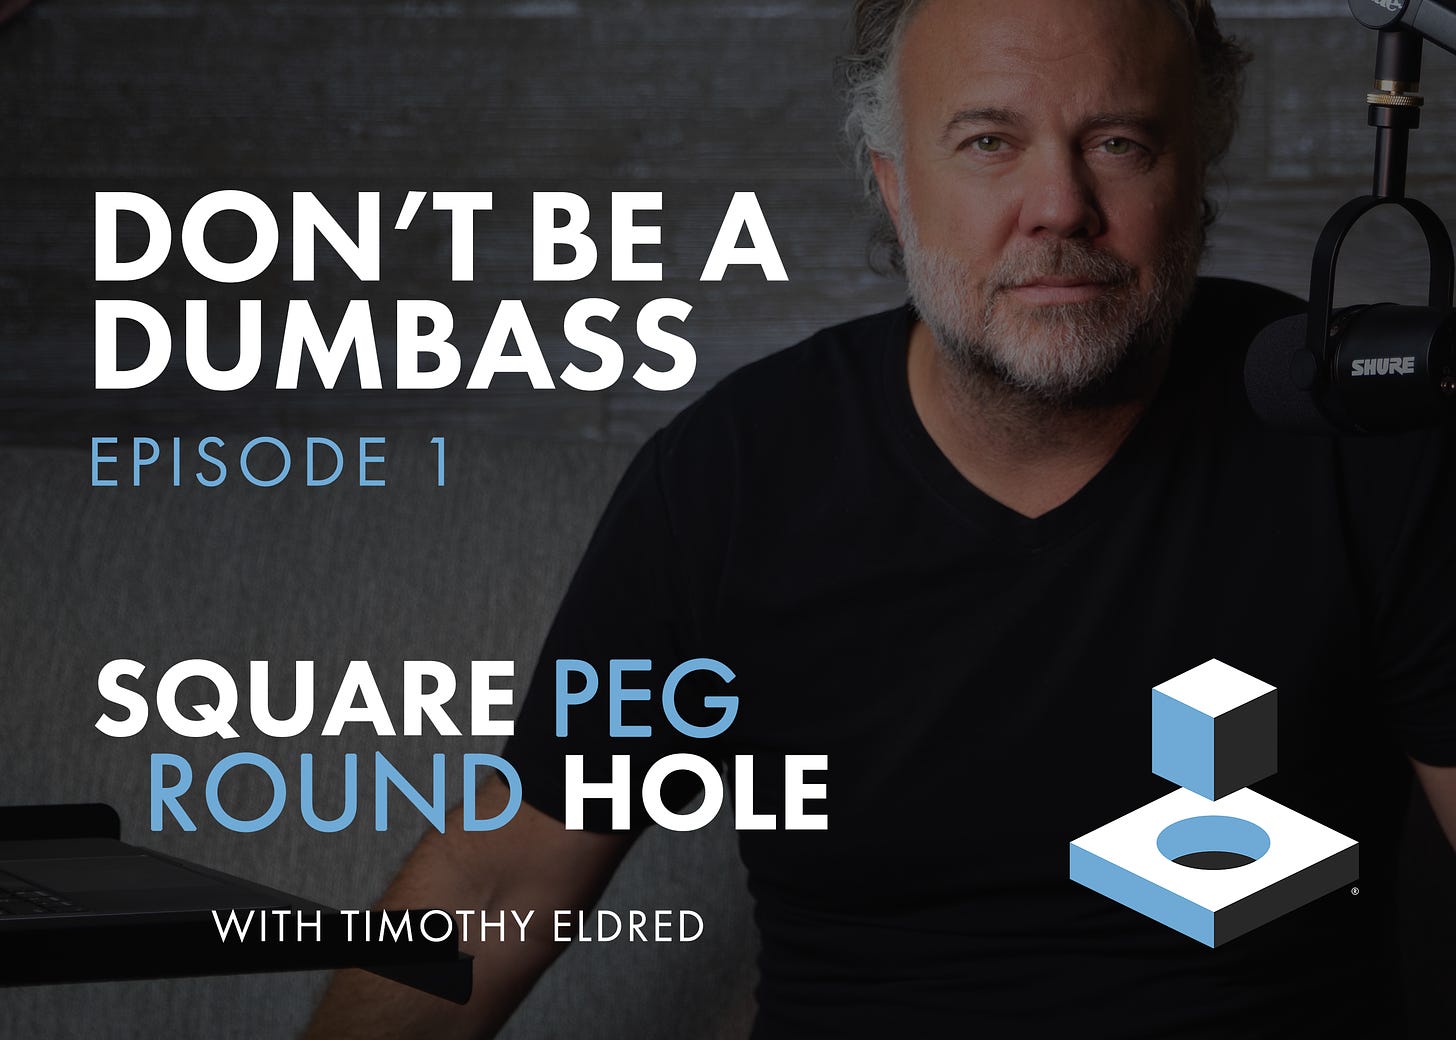 Timothy Eldred | Square Peg Round Hole | Episode 1